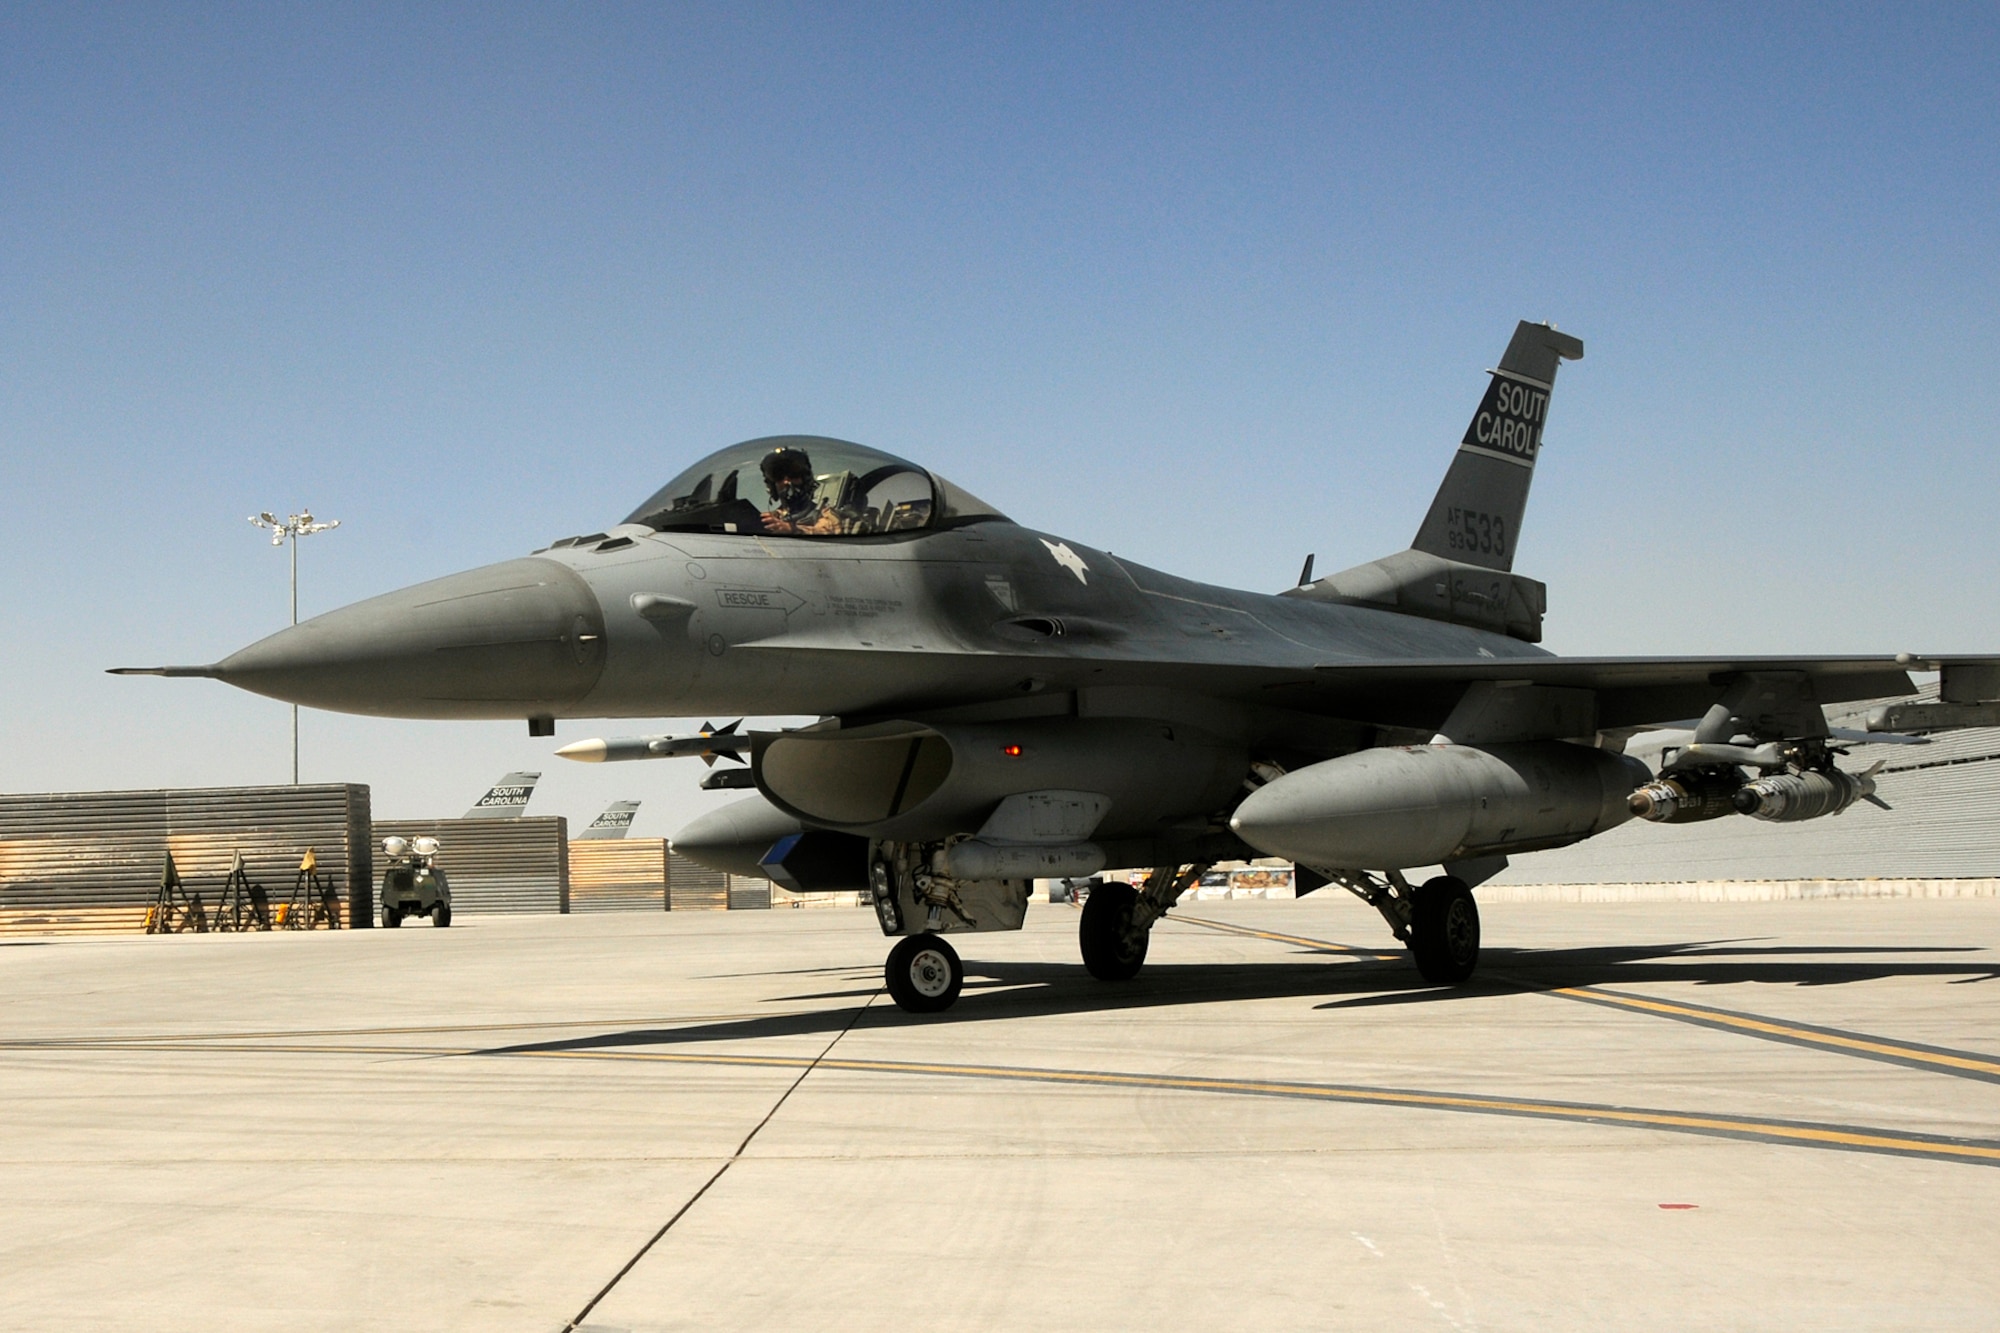 Lieutenant Colonel Scott Bridgers, a fighter pilot assigned to the 157th Expeditionary Fighter Squadron at Kandahar Airfield, Afghanistan, taxis an F-16 Fighting Falcon onto the flight line after flying a mission and reaching his 4,000th flying hour June 2, 2012. Lt. Col. Bridgers is the third fighter pilot to have achieved that level of flying from McEntire Joint National Guard Base, S.C.. Swamp Fox F-16's, pilots, and support personnel began their Air Expeditionary Force deployment early April to take over flying missions for the air tasking order and provide close air support for troops on the ground in Afghanistan in support of Operation Enduring Freedom.
(U.S. Air Force photo/TSgt. Caycee Cook)
